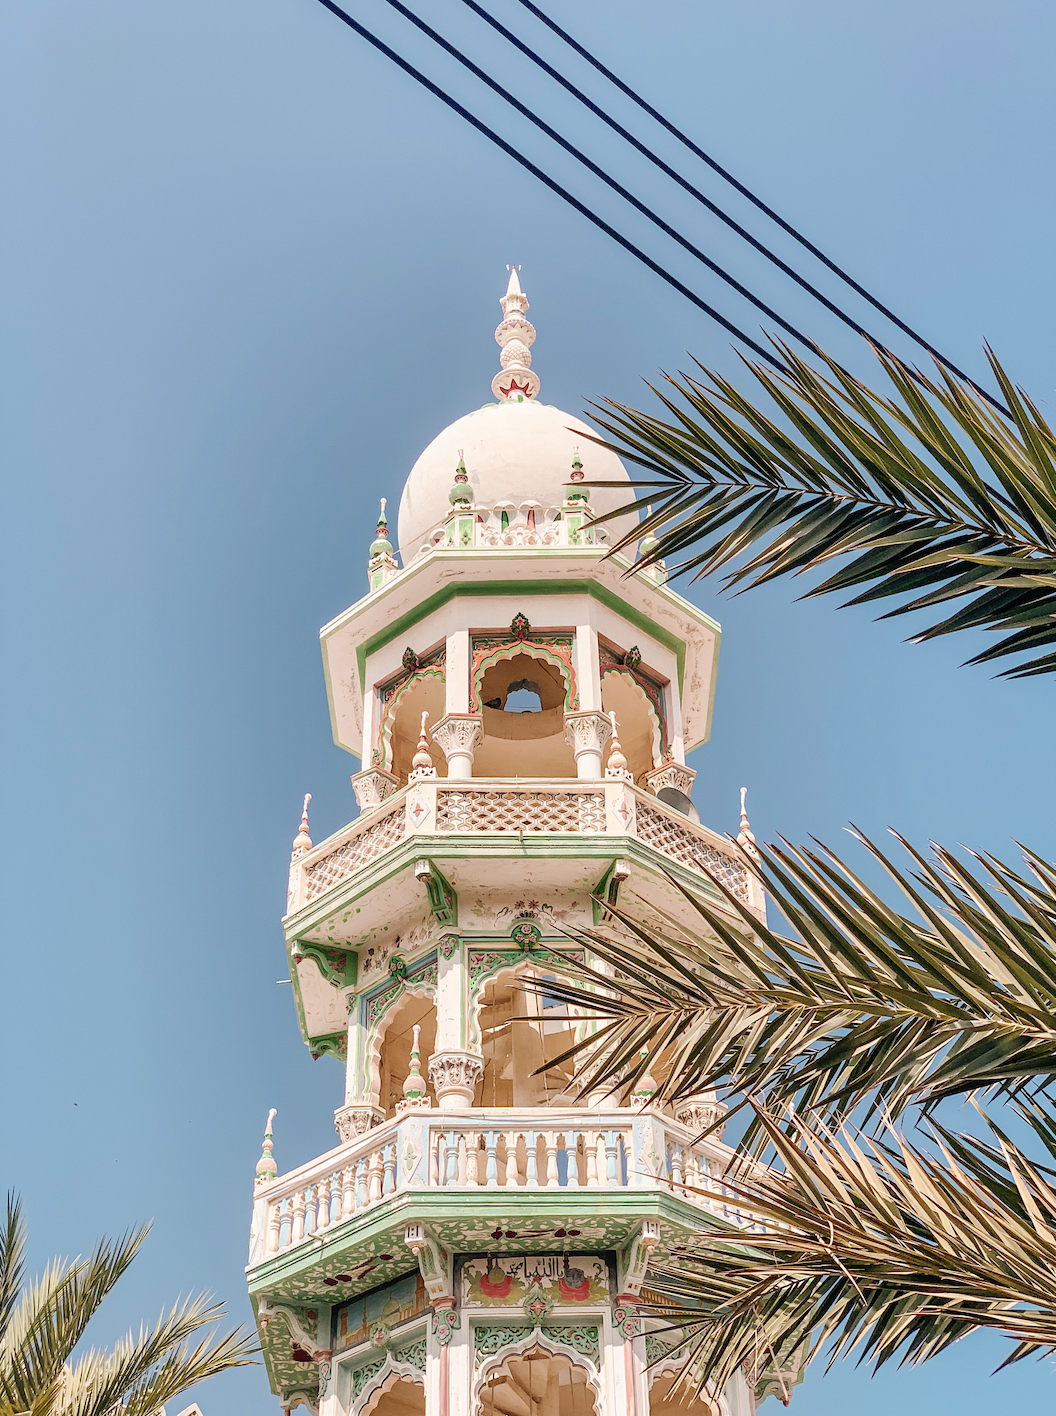 The ornate painted tower of a Mosque in Mutrah, Oman captured by photographer Israa Al Balushi as part of Marchitecture.